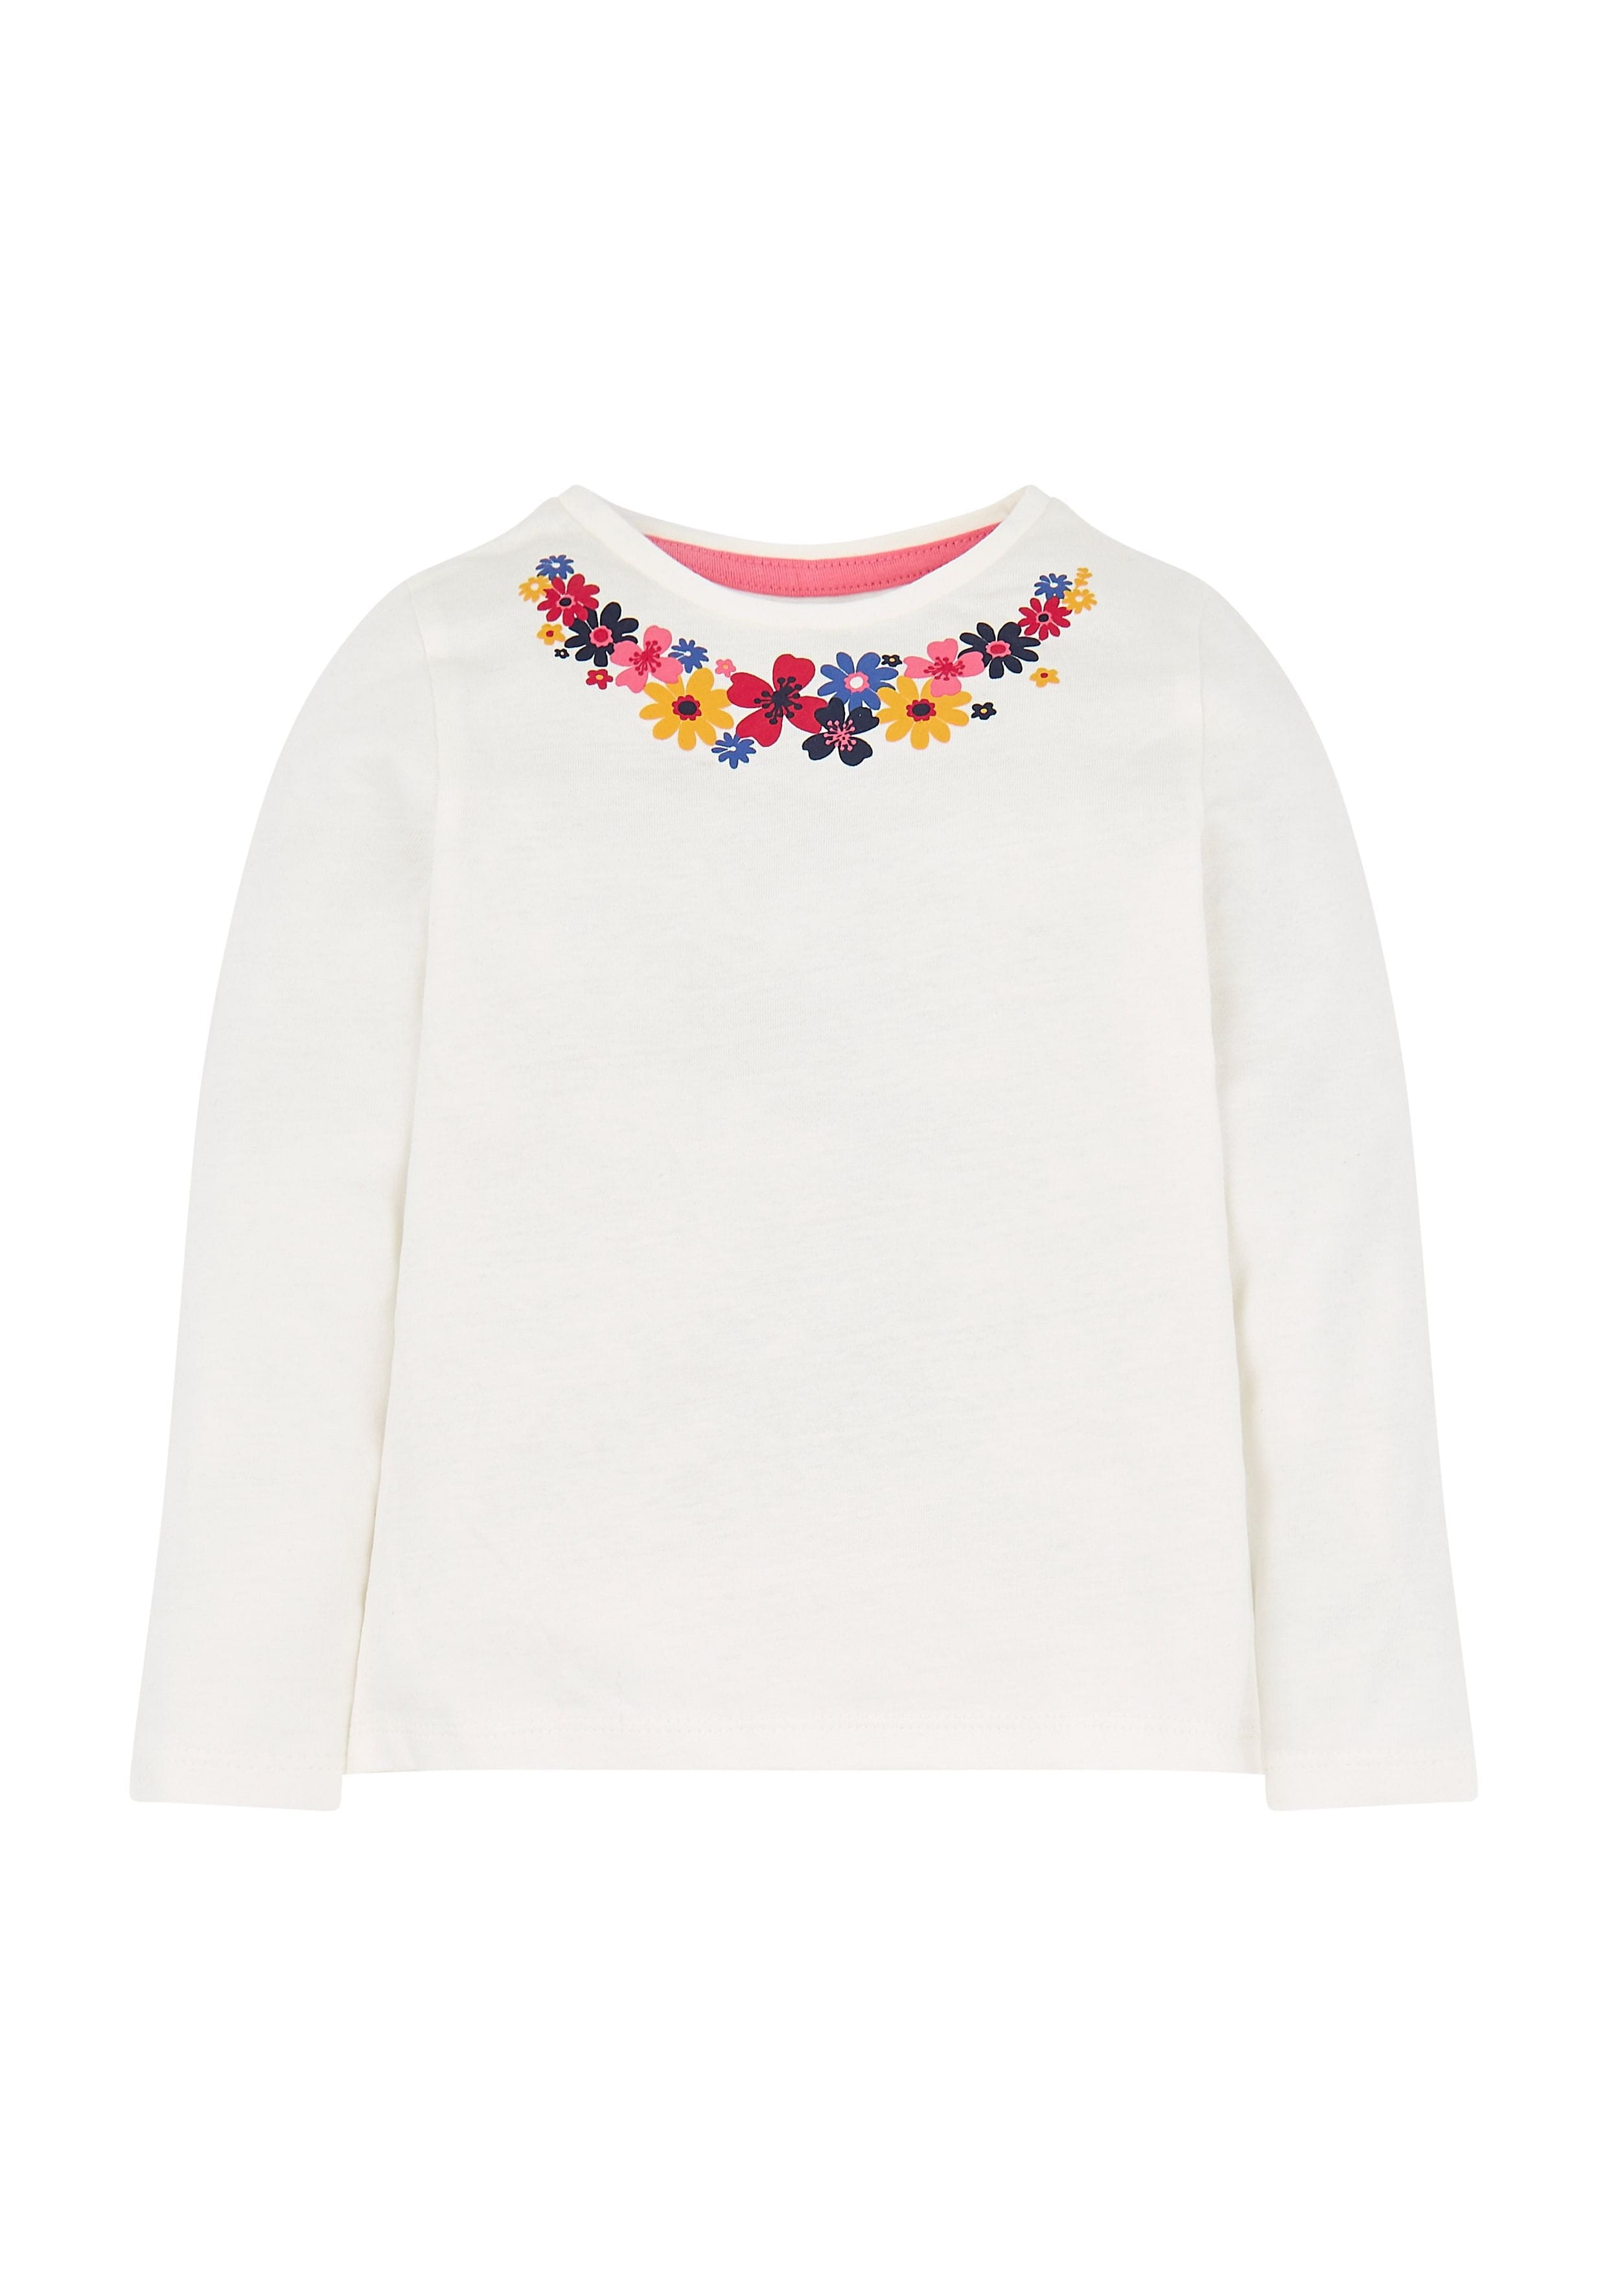 Mothercare | Floral Neck T-Shirt 0